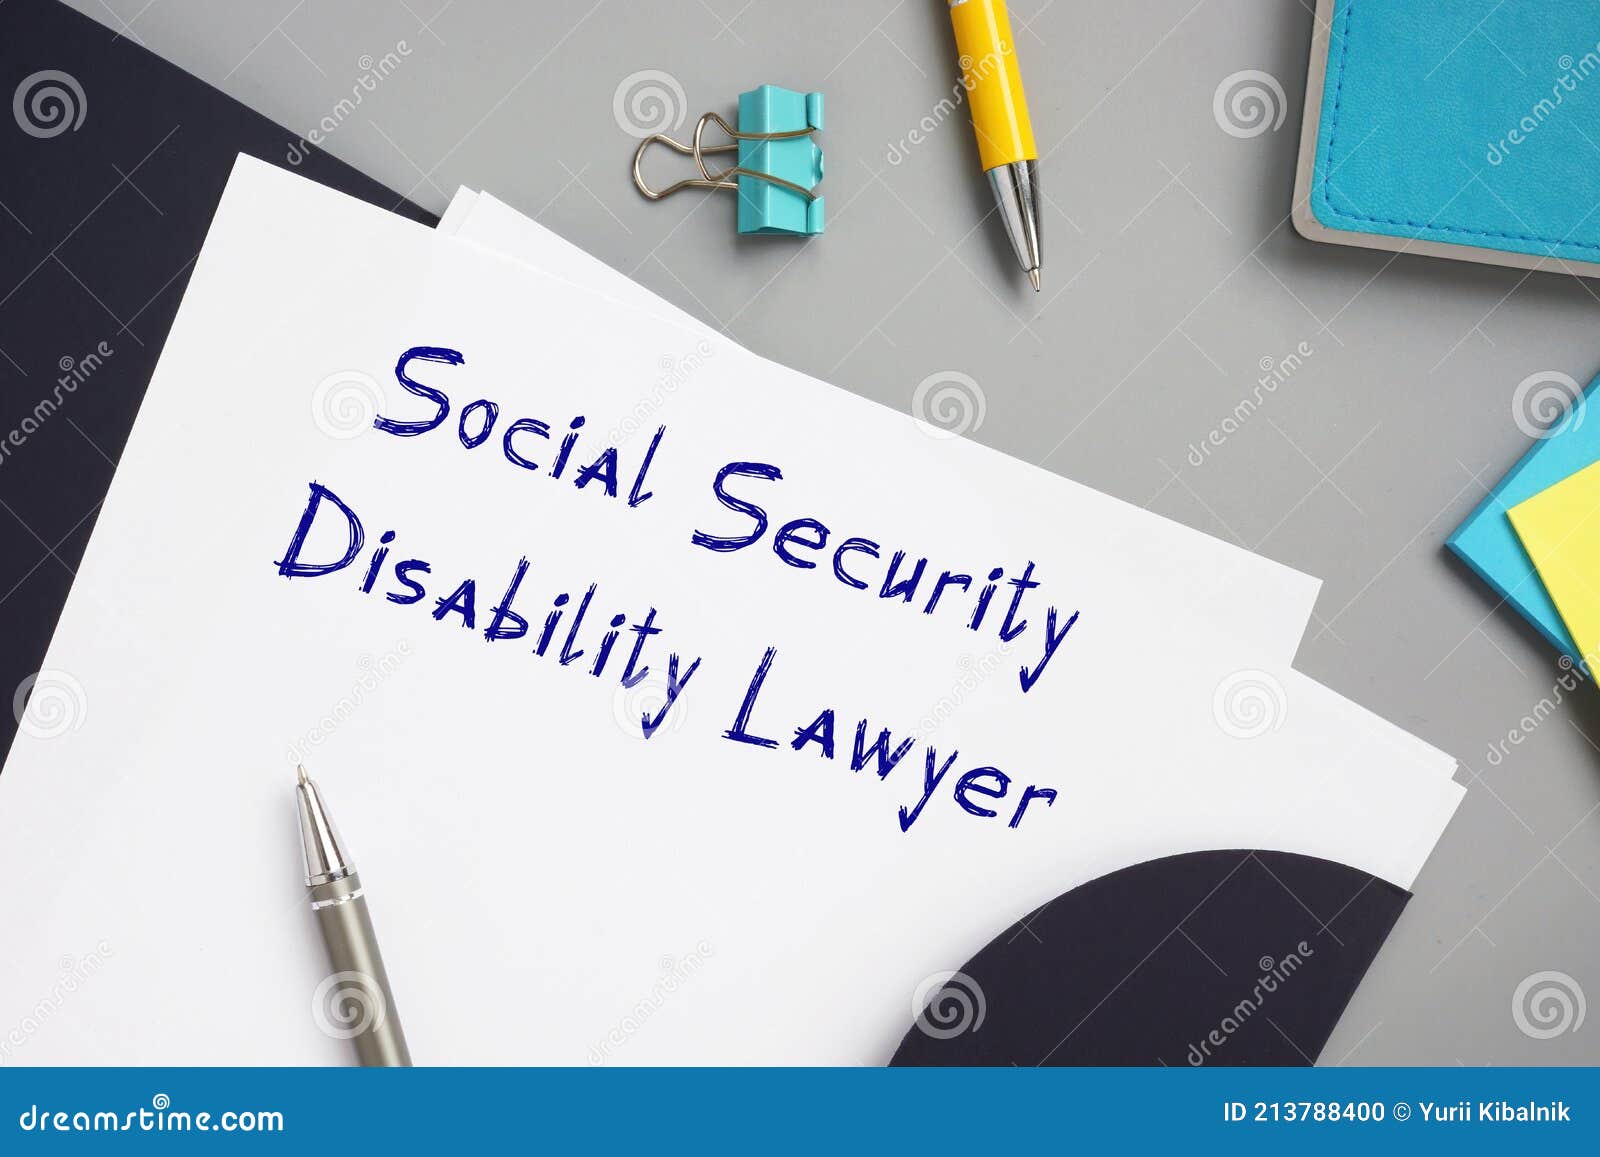 juridical concept meaning social security disability lawyer with sign on the sheet